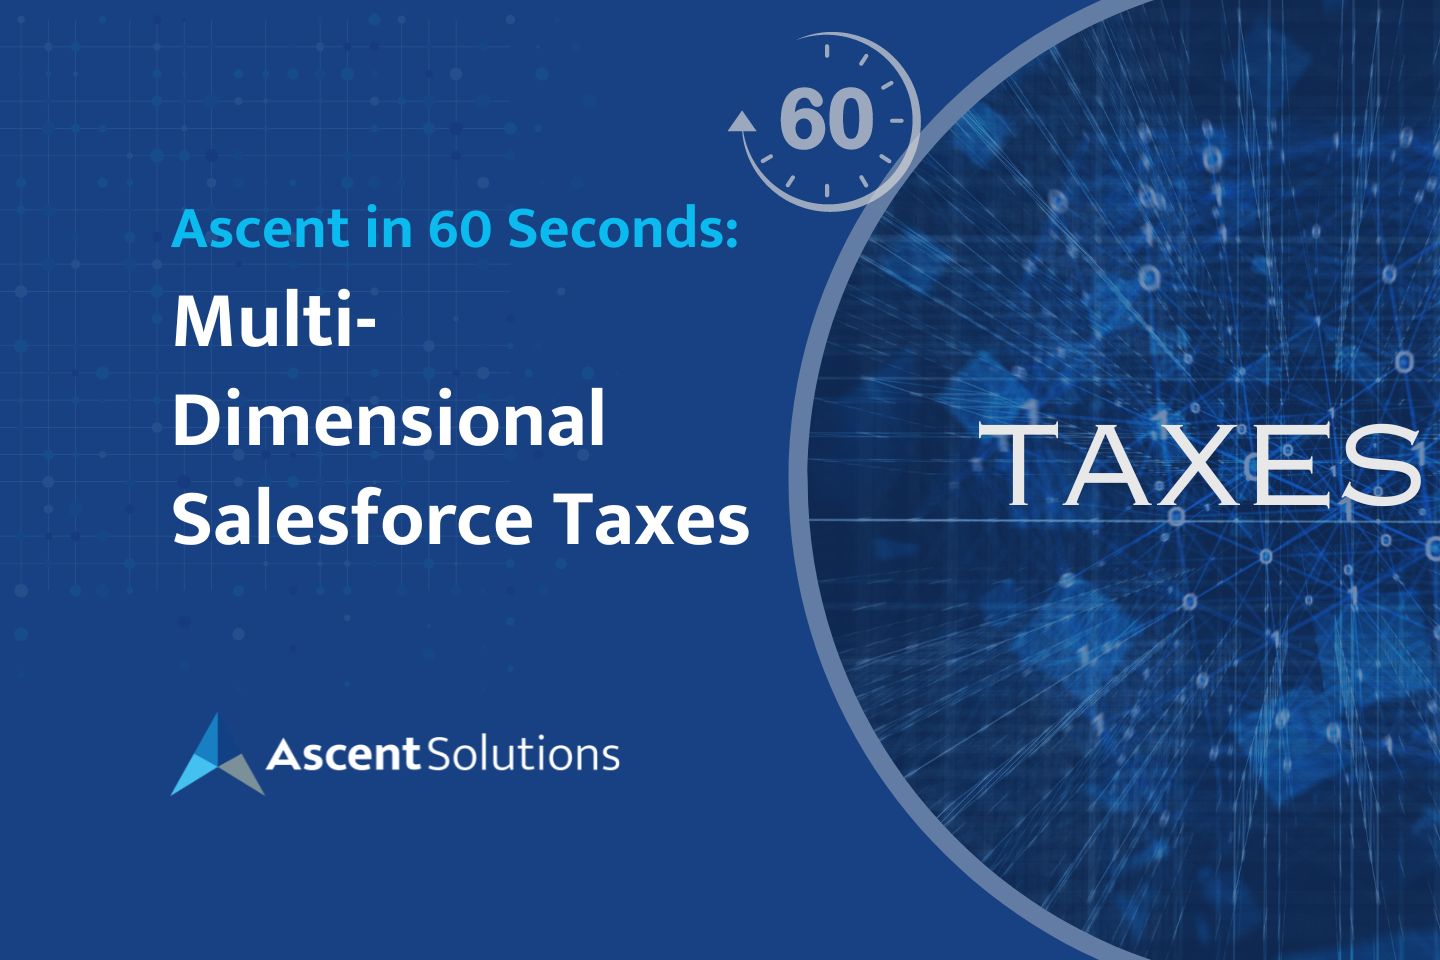 Ascent Solutions in 60 Seconds Multi-Dimensional Salesforce Taxes